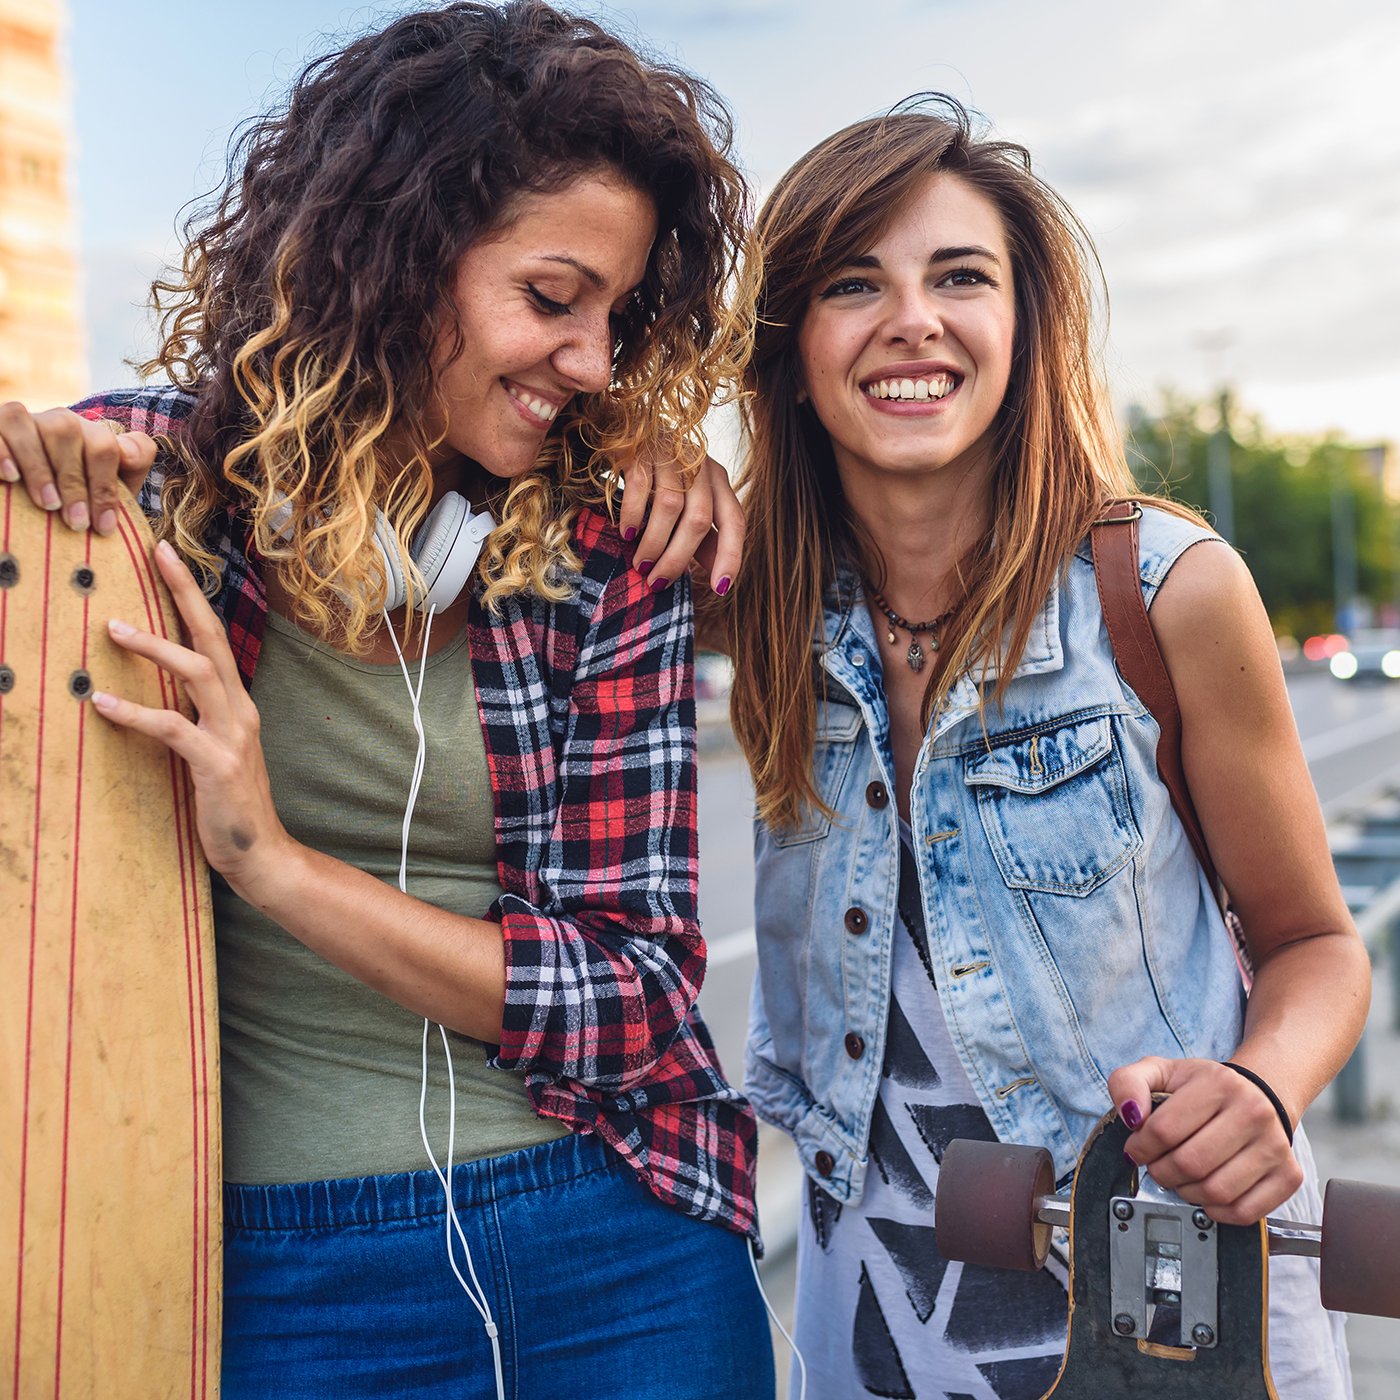 Smiling skateboarding girls standing in the street hanging out,